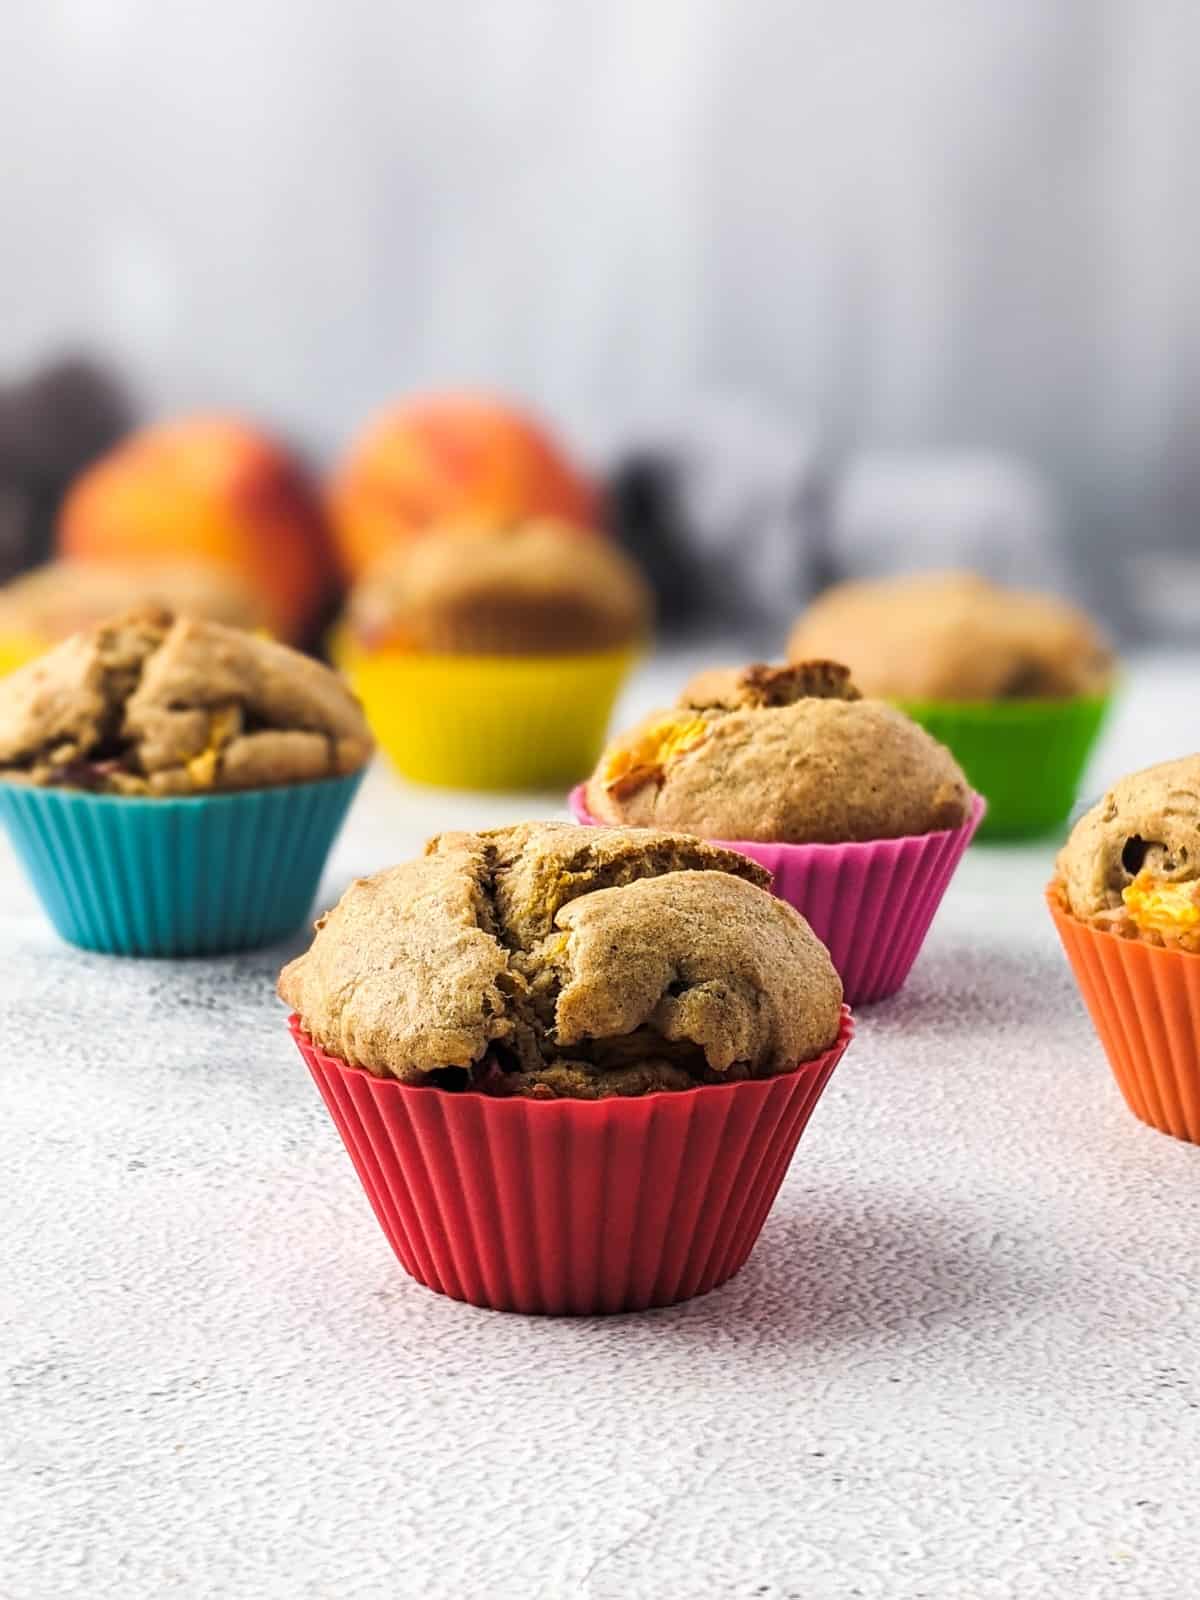 Sugar-free peach muffins on the table in colorful muffin cases one next to the other.